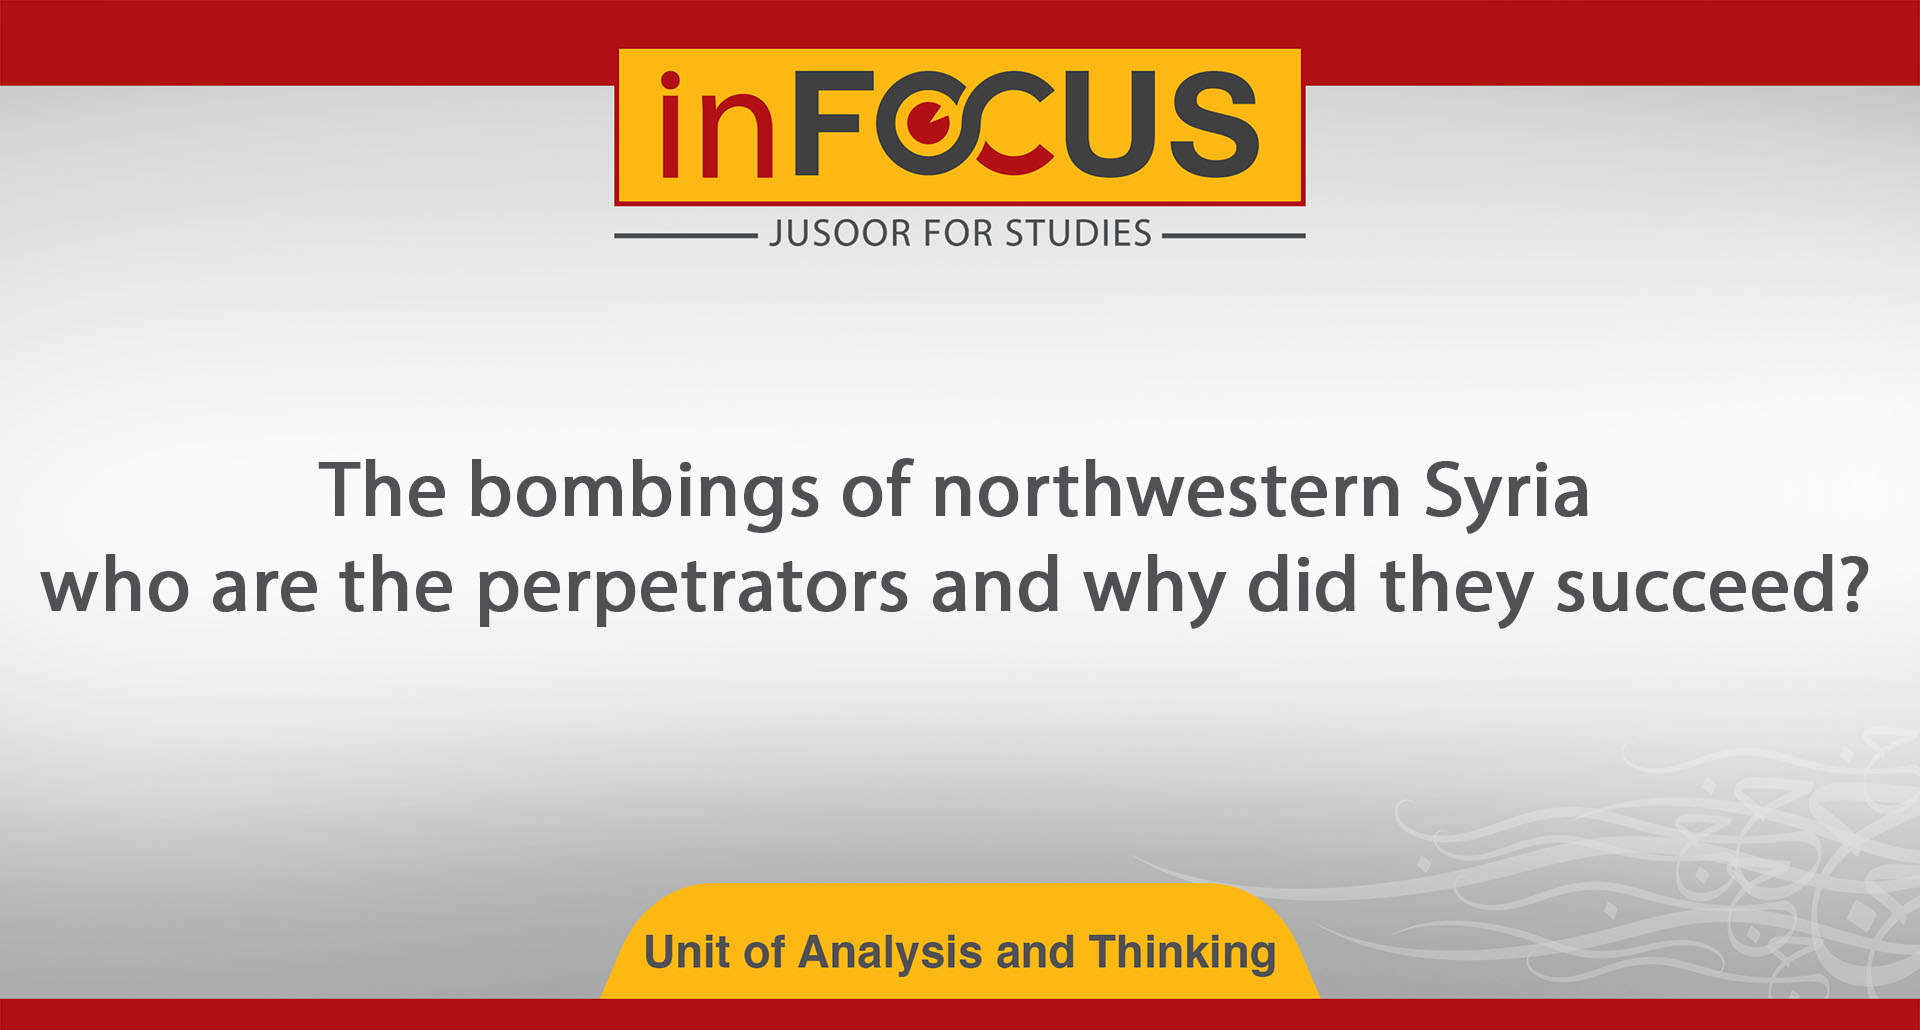 The bombings of northwestern Syria: who are the perpetrators and why did they succeed?